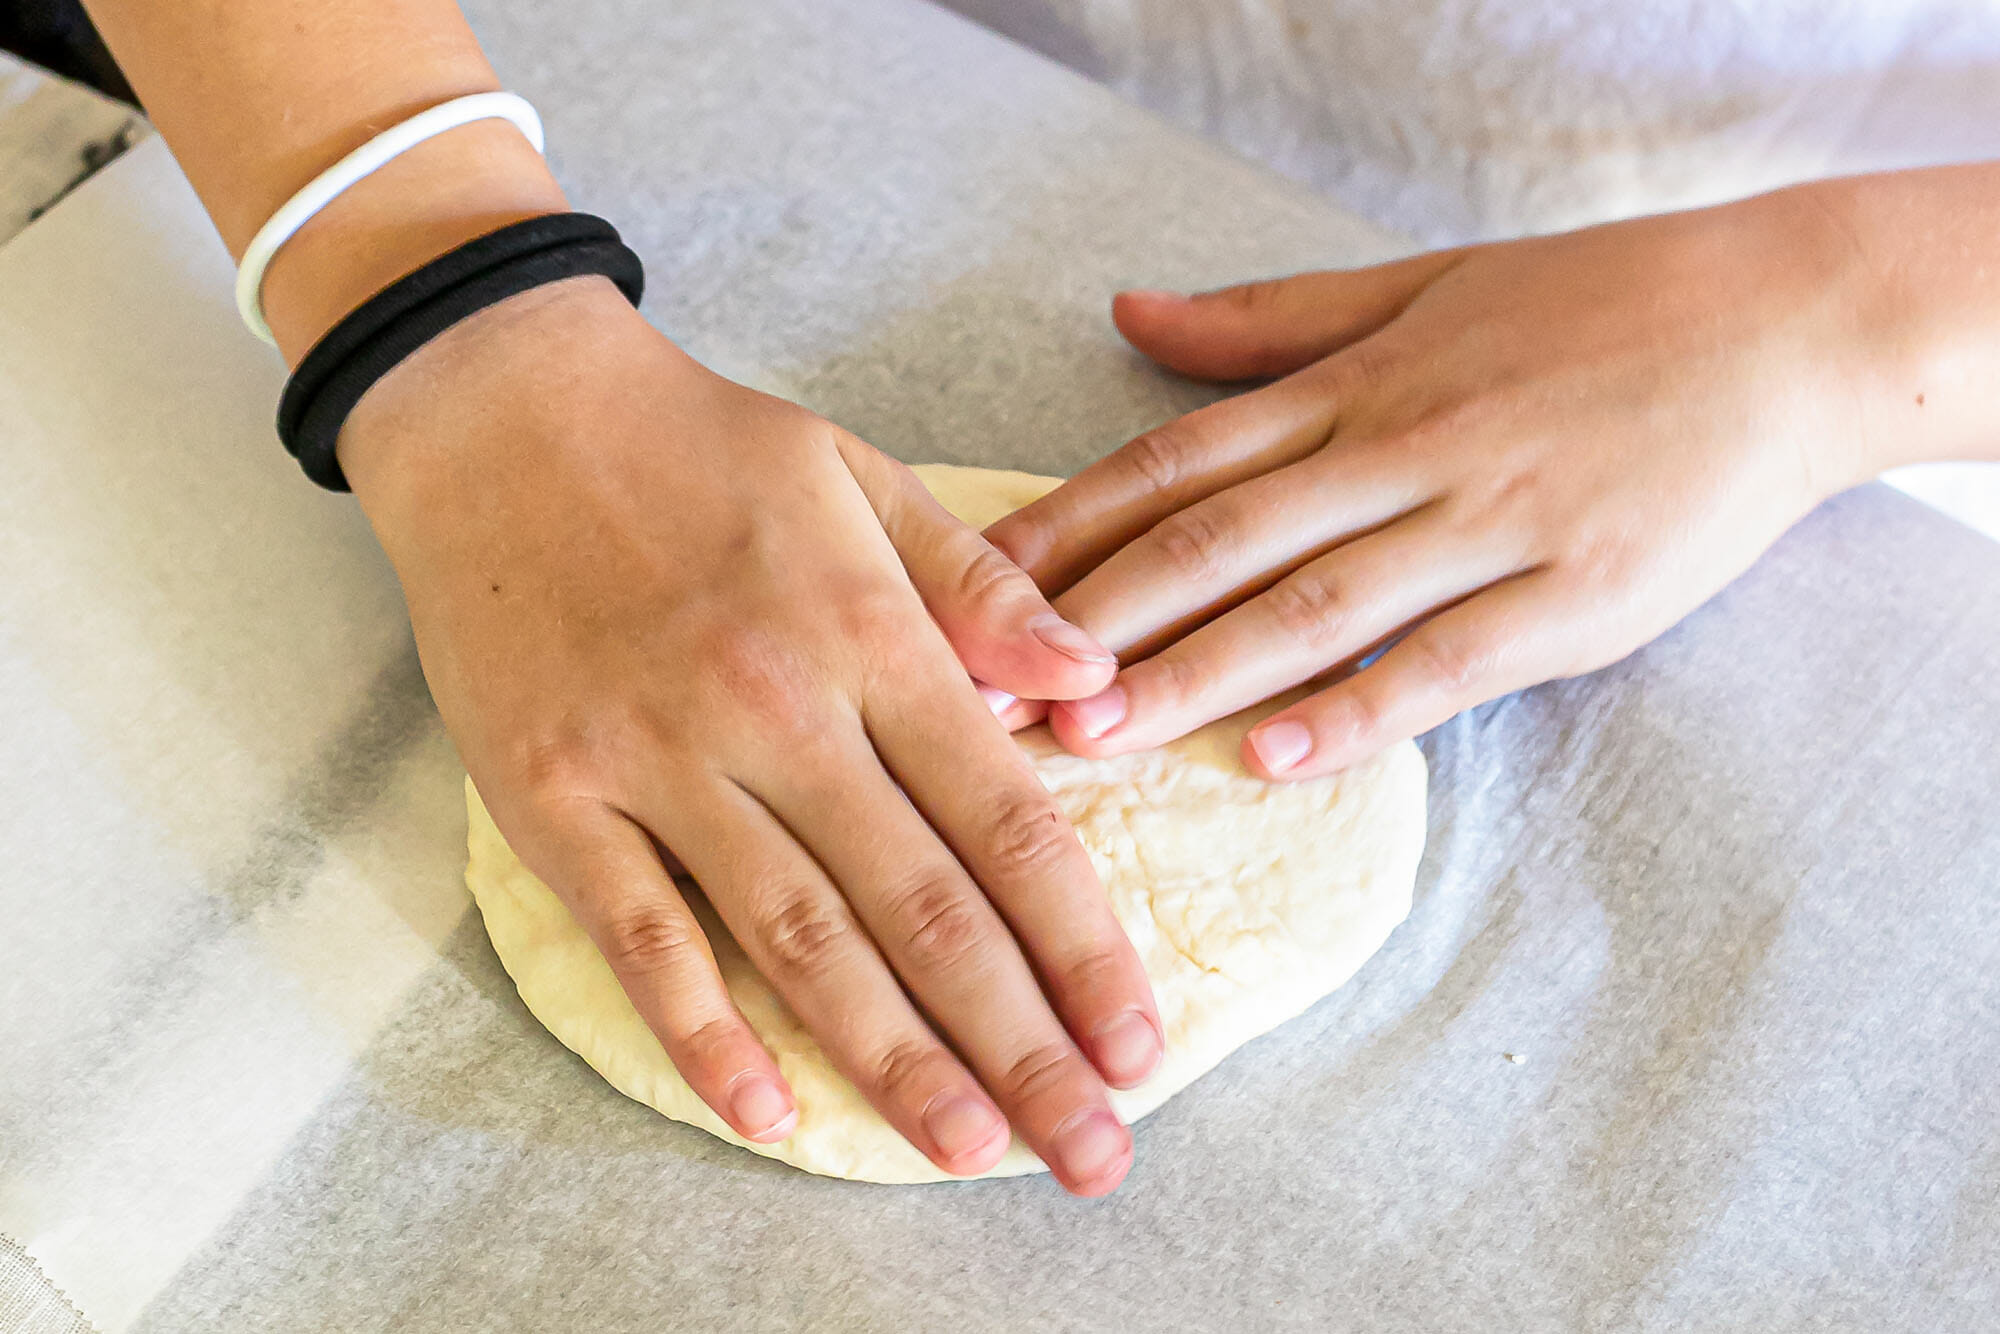 How to grill pizza. Hands flatten a pizza dough ball on a piece of parchment.